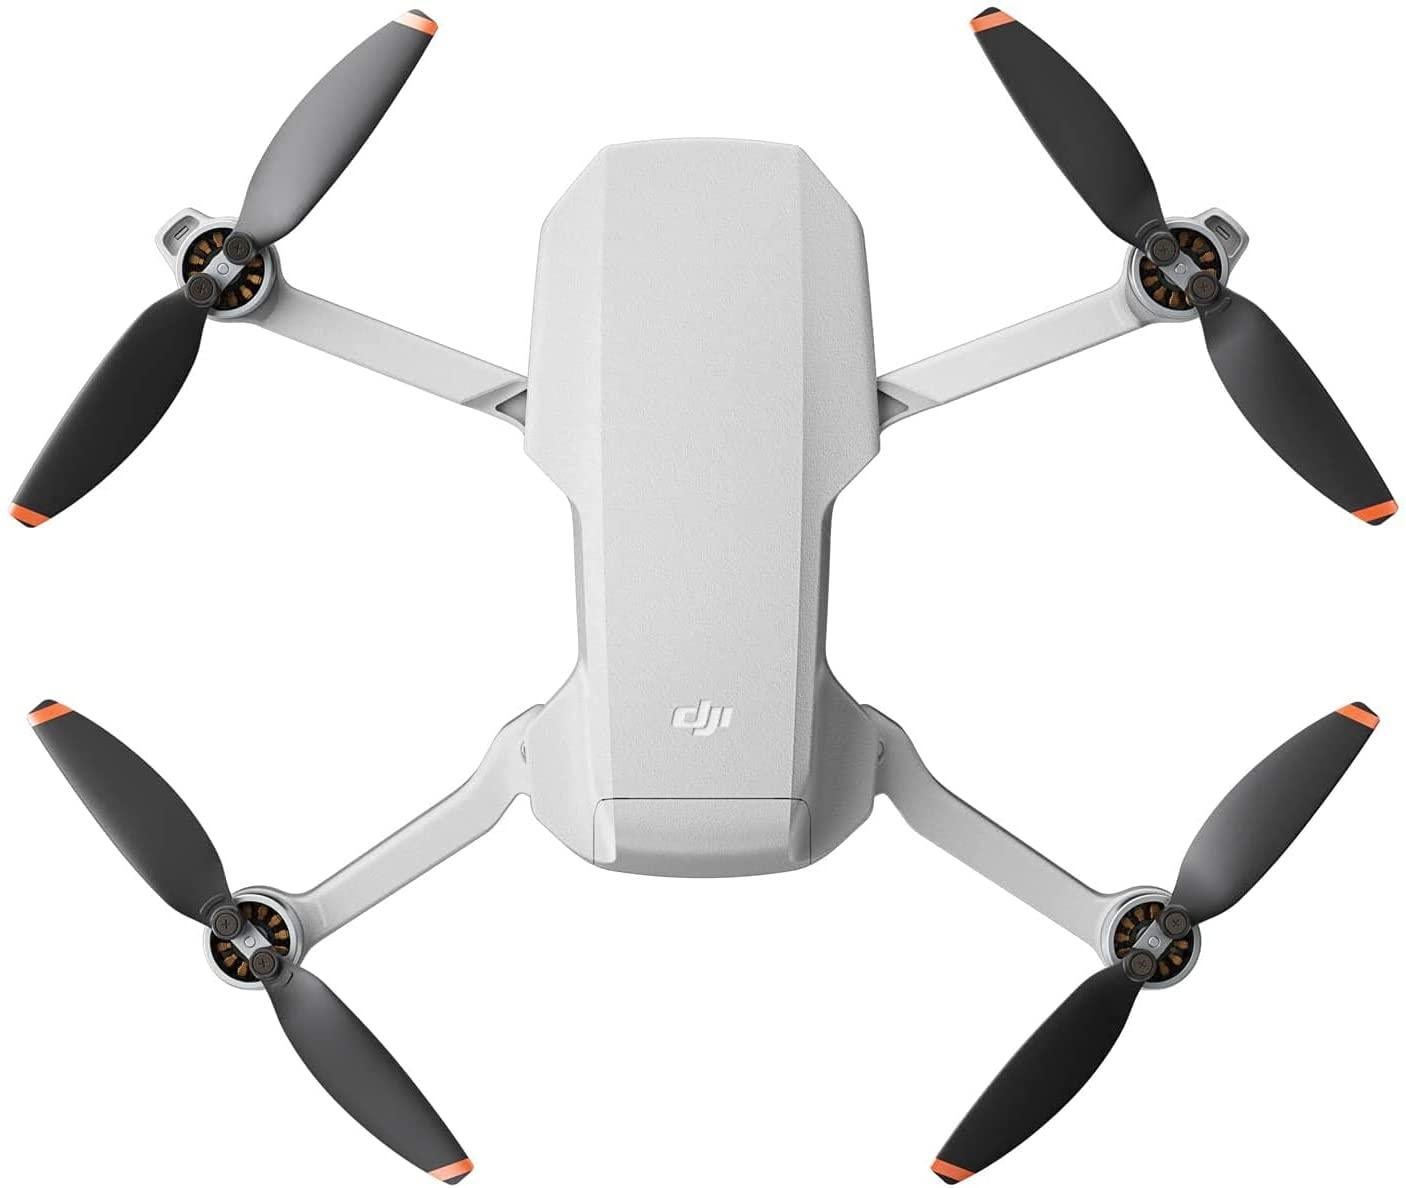 DJI Mini 2 SE Drone With 12 MP Camera, Stable Hovering